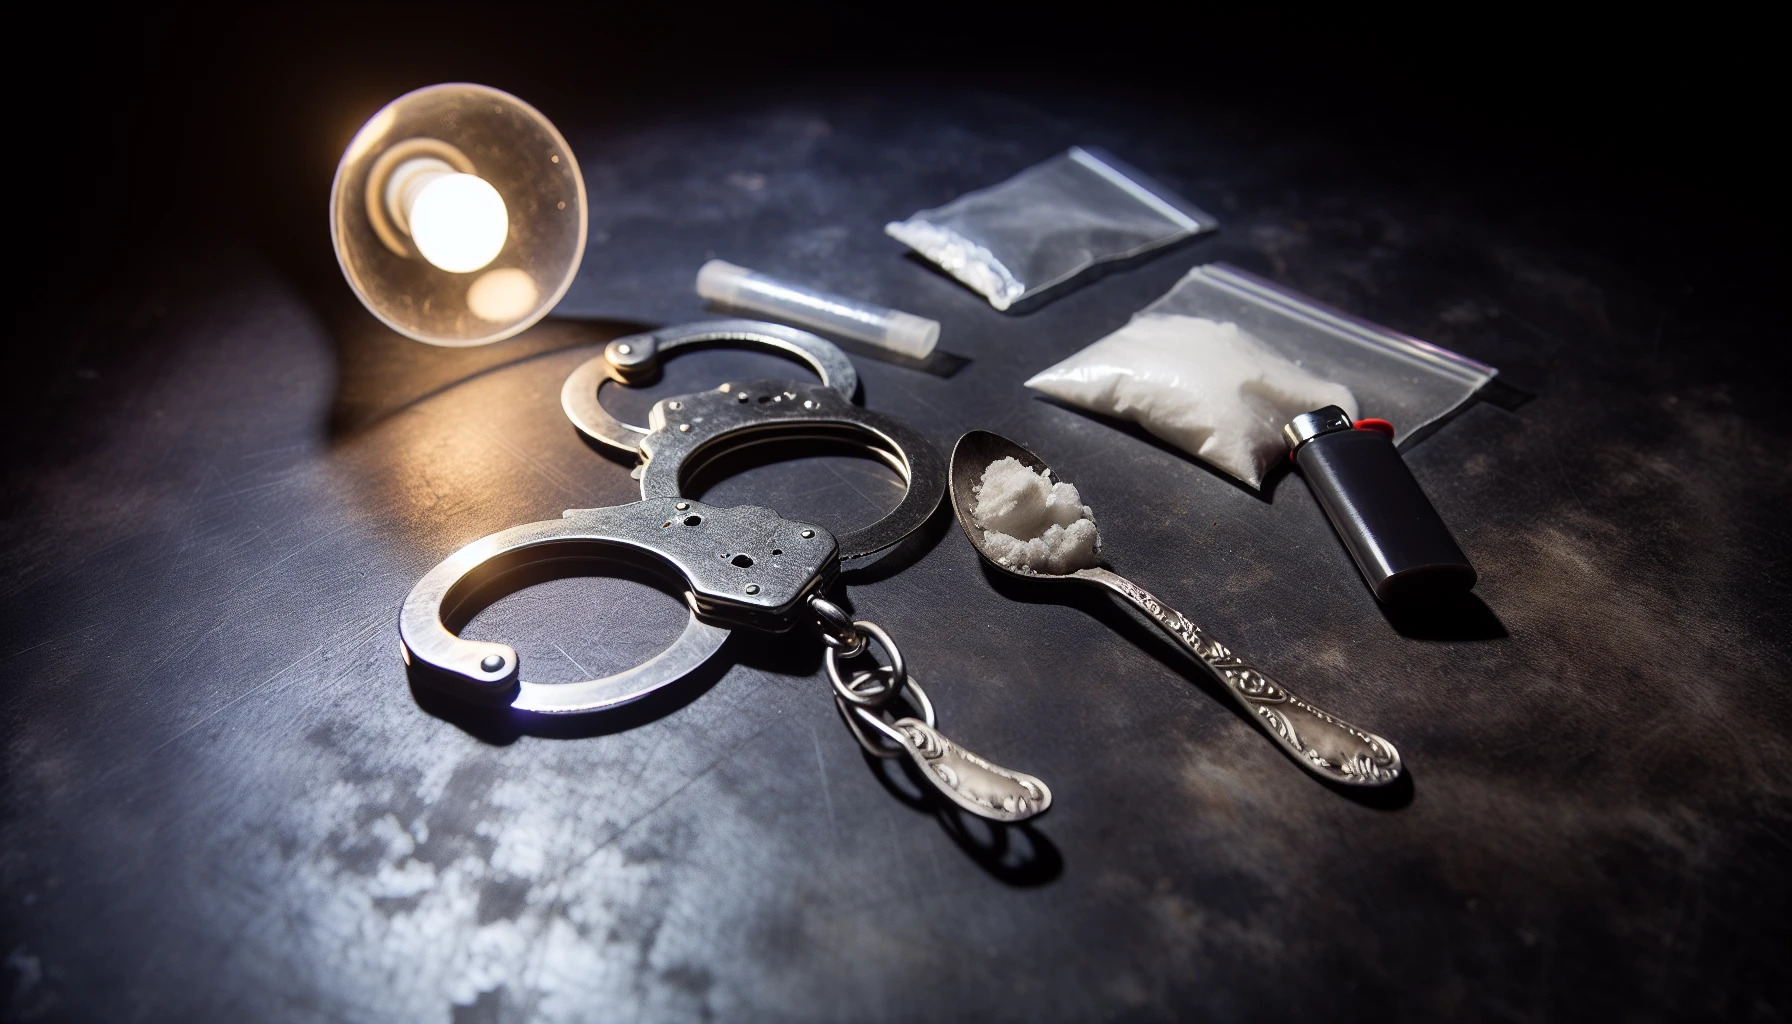 Image of handcuffs and drug paraphernalia symbolizing the criminal justice system and drug-related offenses